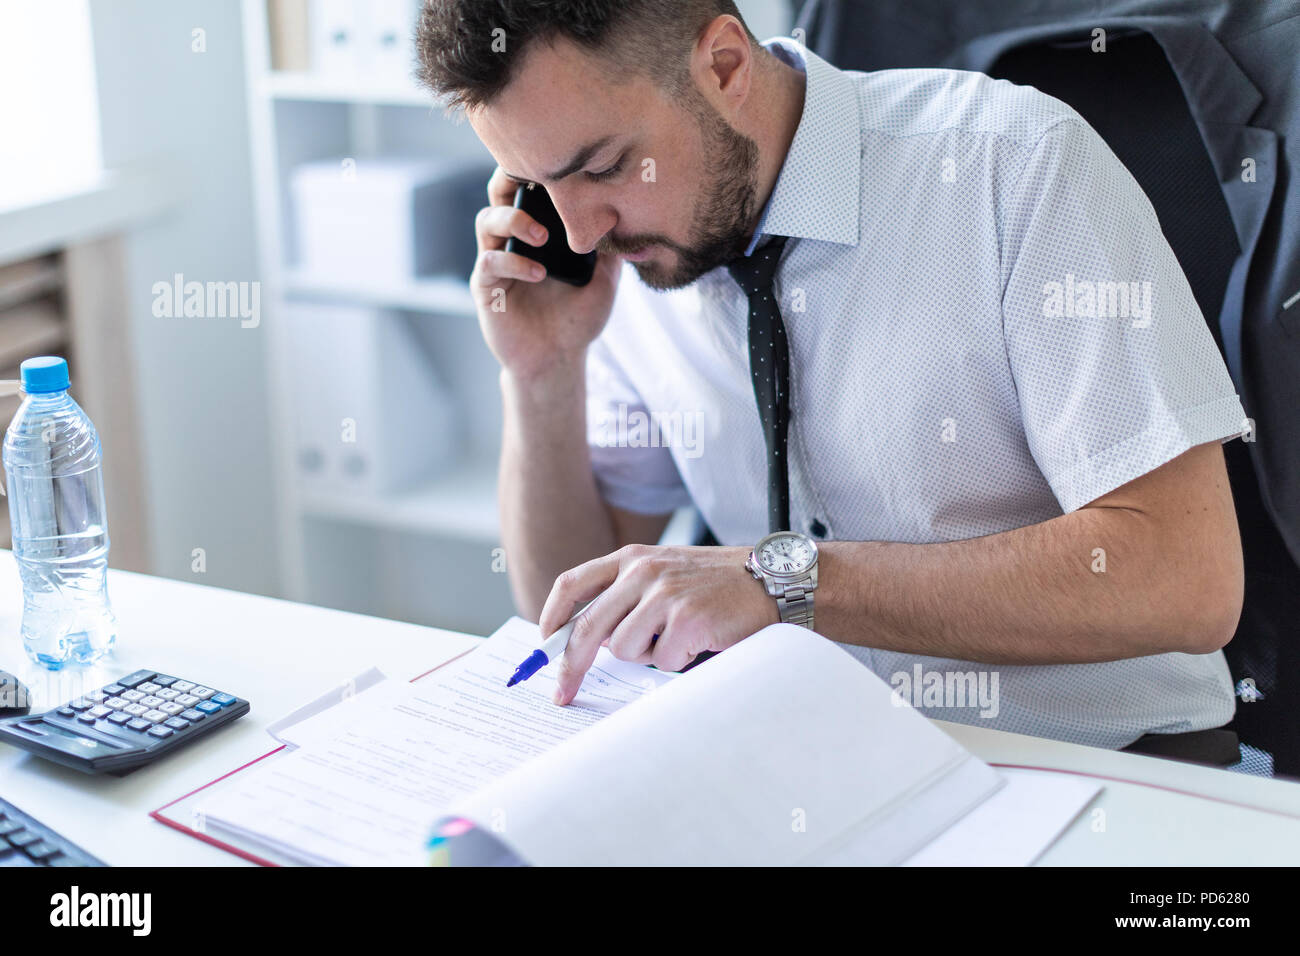 A man is sitting in the office, working with documents and talking on the phone. Stock Photo